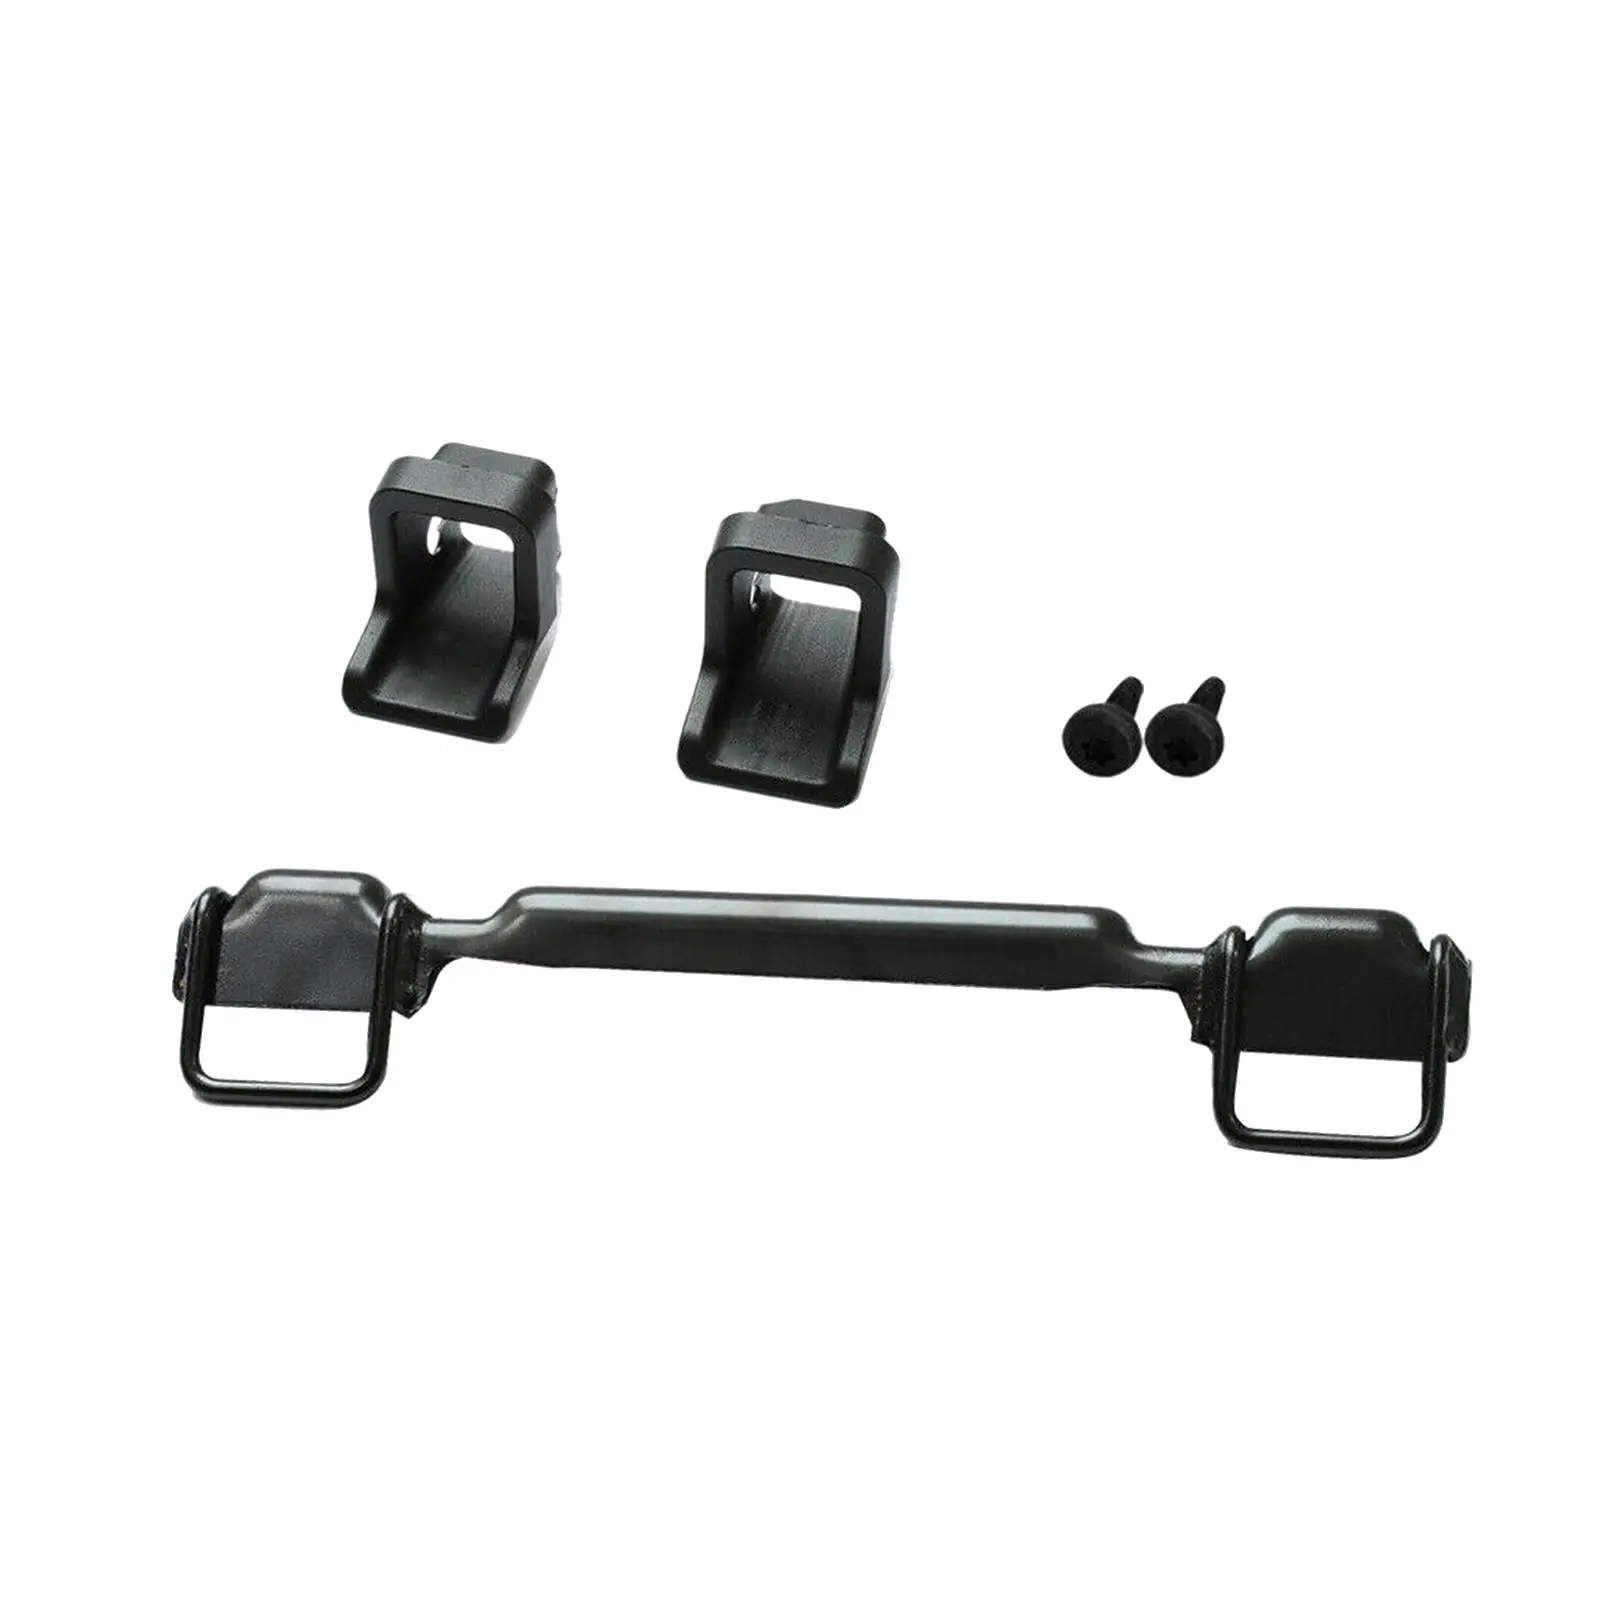 Isofix Latch Connector Interior Mounting Kit Fit for Ford Focus MK2 05-2010 1357238 Child Safety Seat Accessories Auto Parts